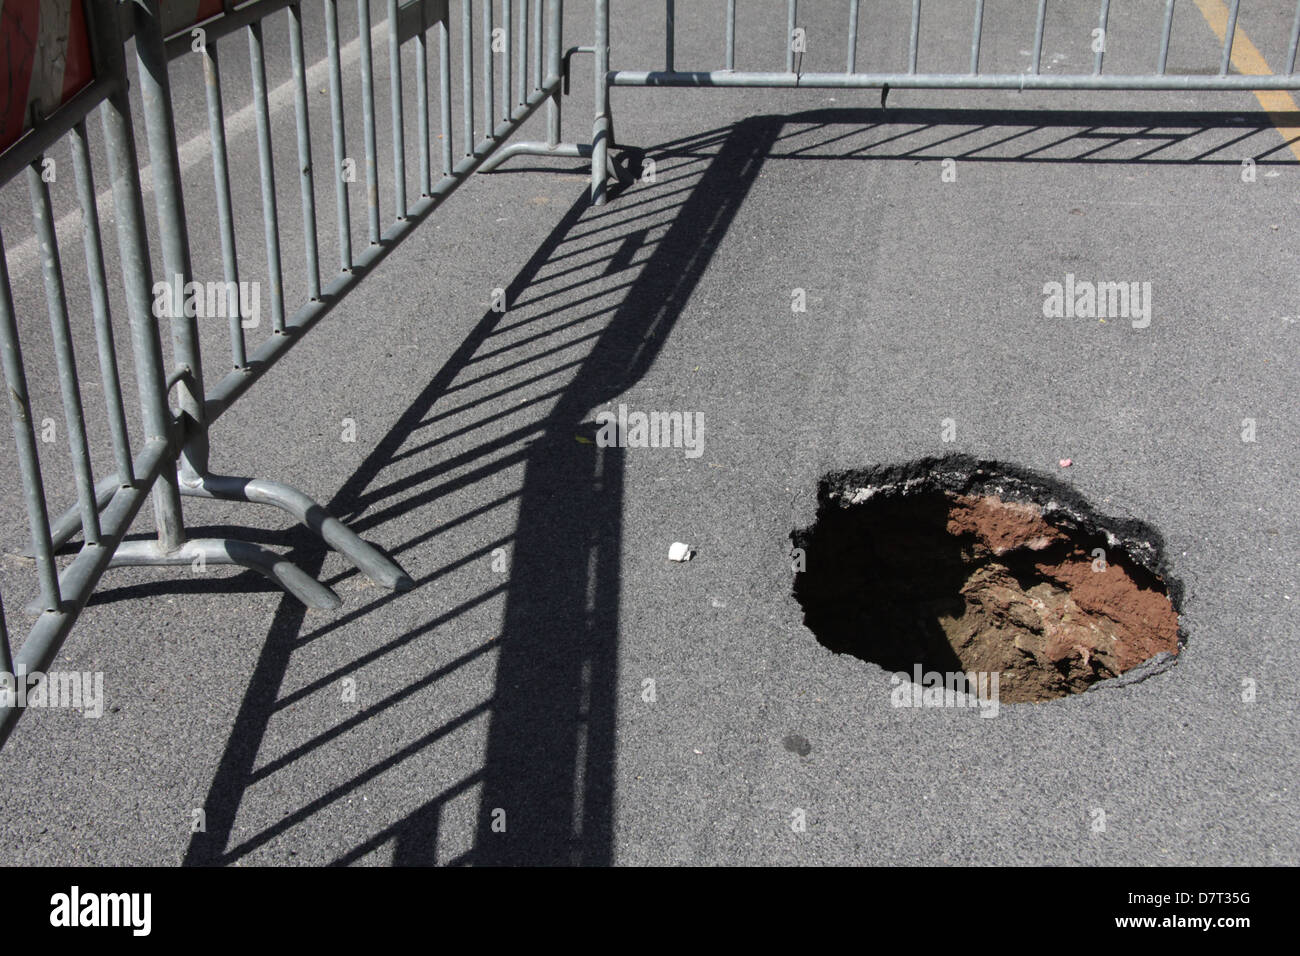 detail of hole in damaged road surface in city town Stock Photo